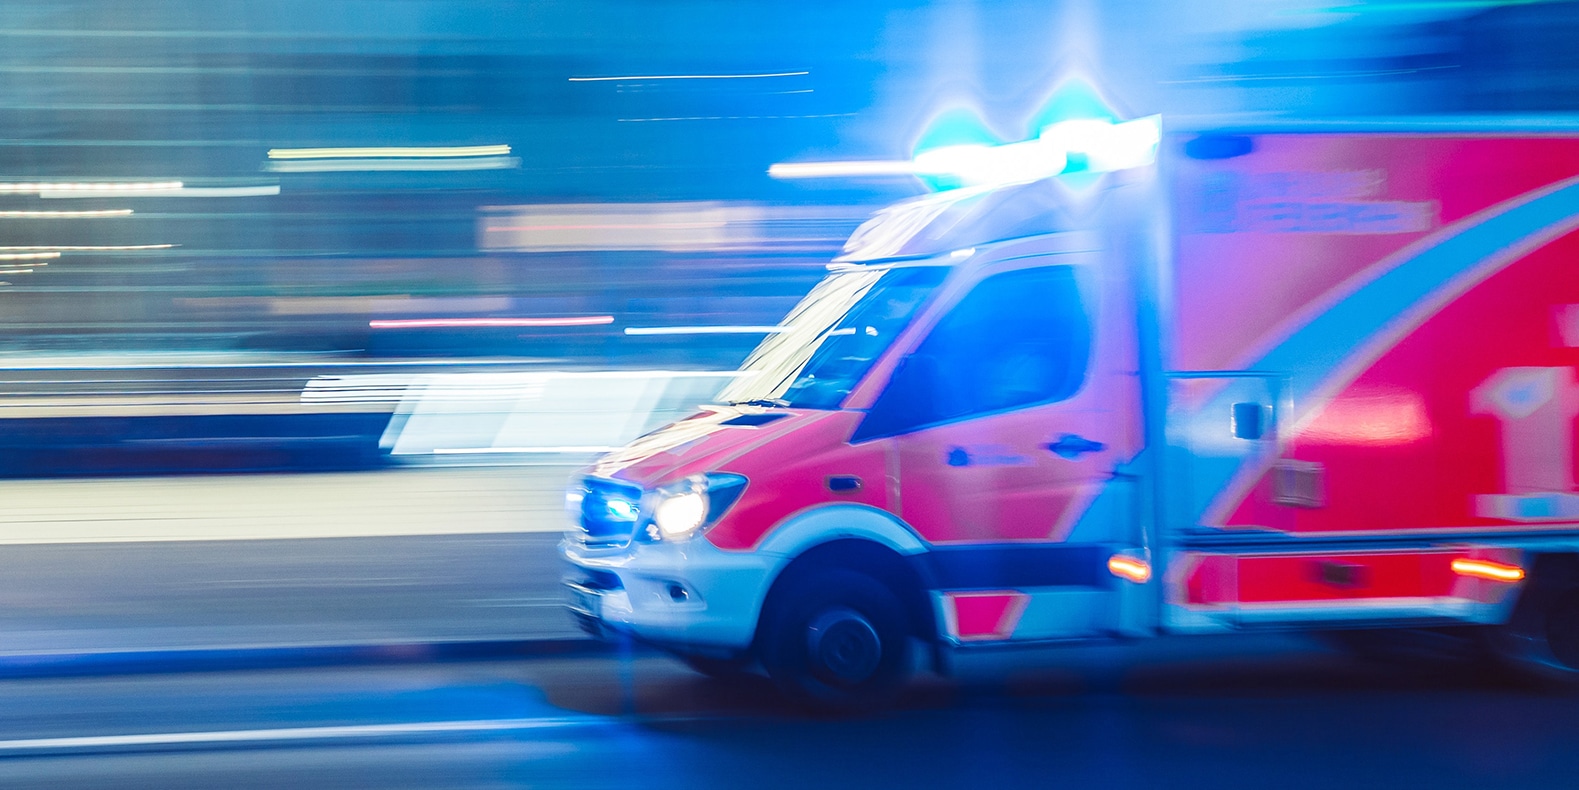 Study: Cost of Ambulance Rides Soar While Patients, Accident Victims Pay More